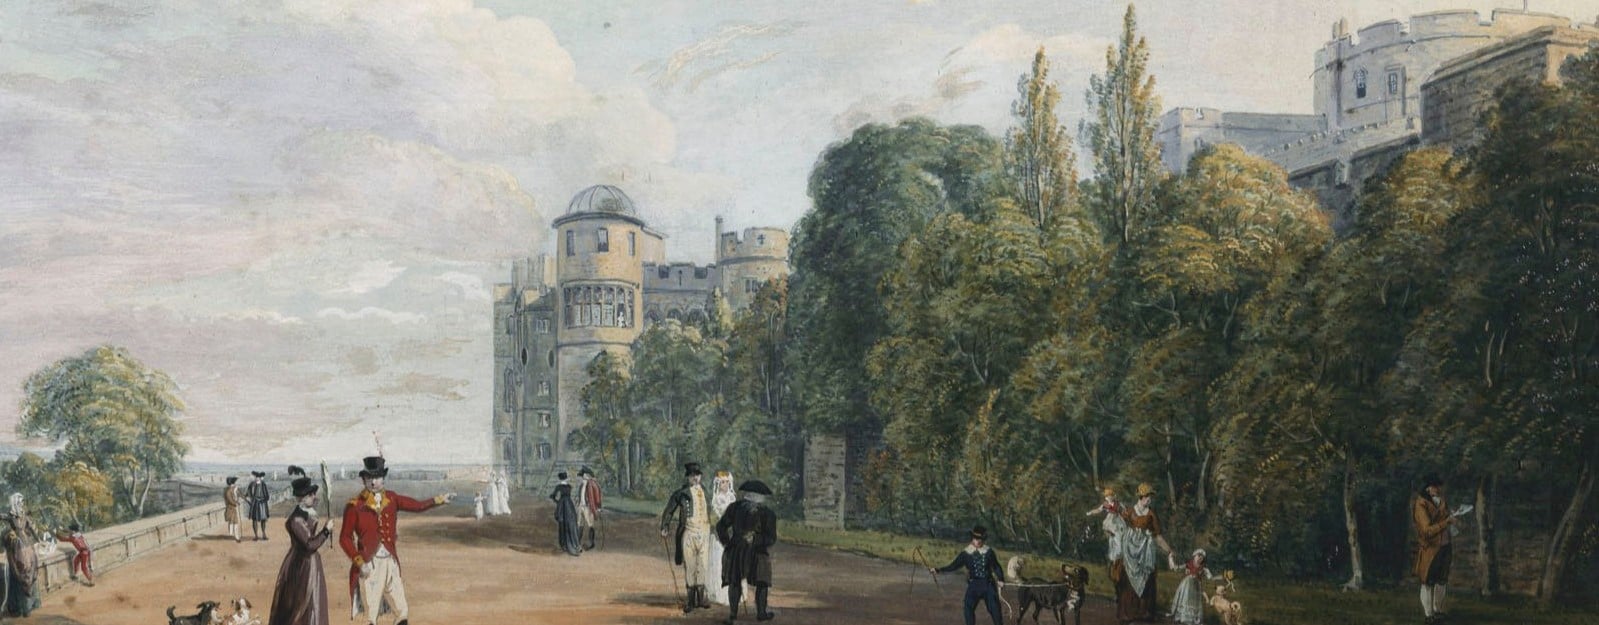 Section of a Victorian watercolour showing people on the North Terrace at Windsor Castle.